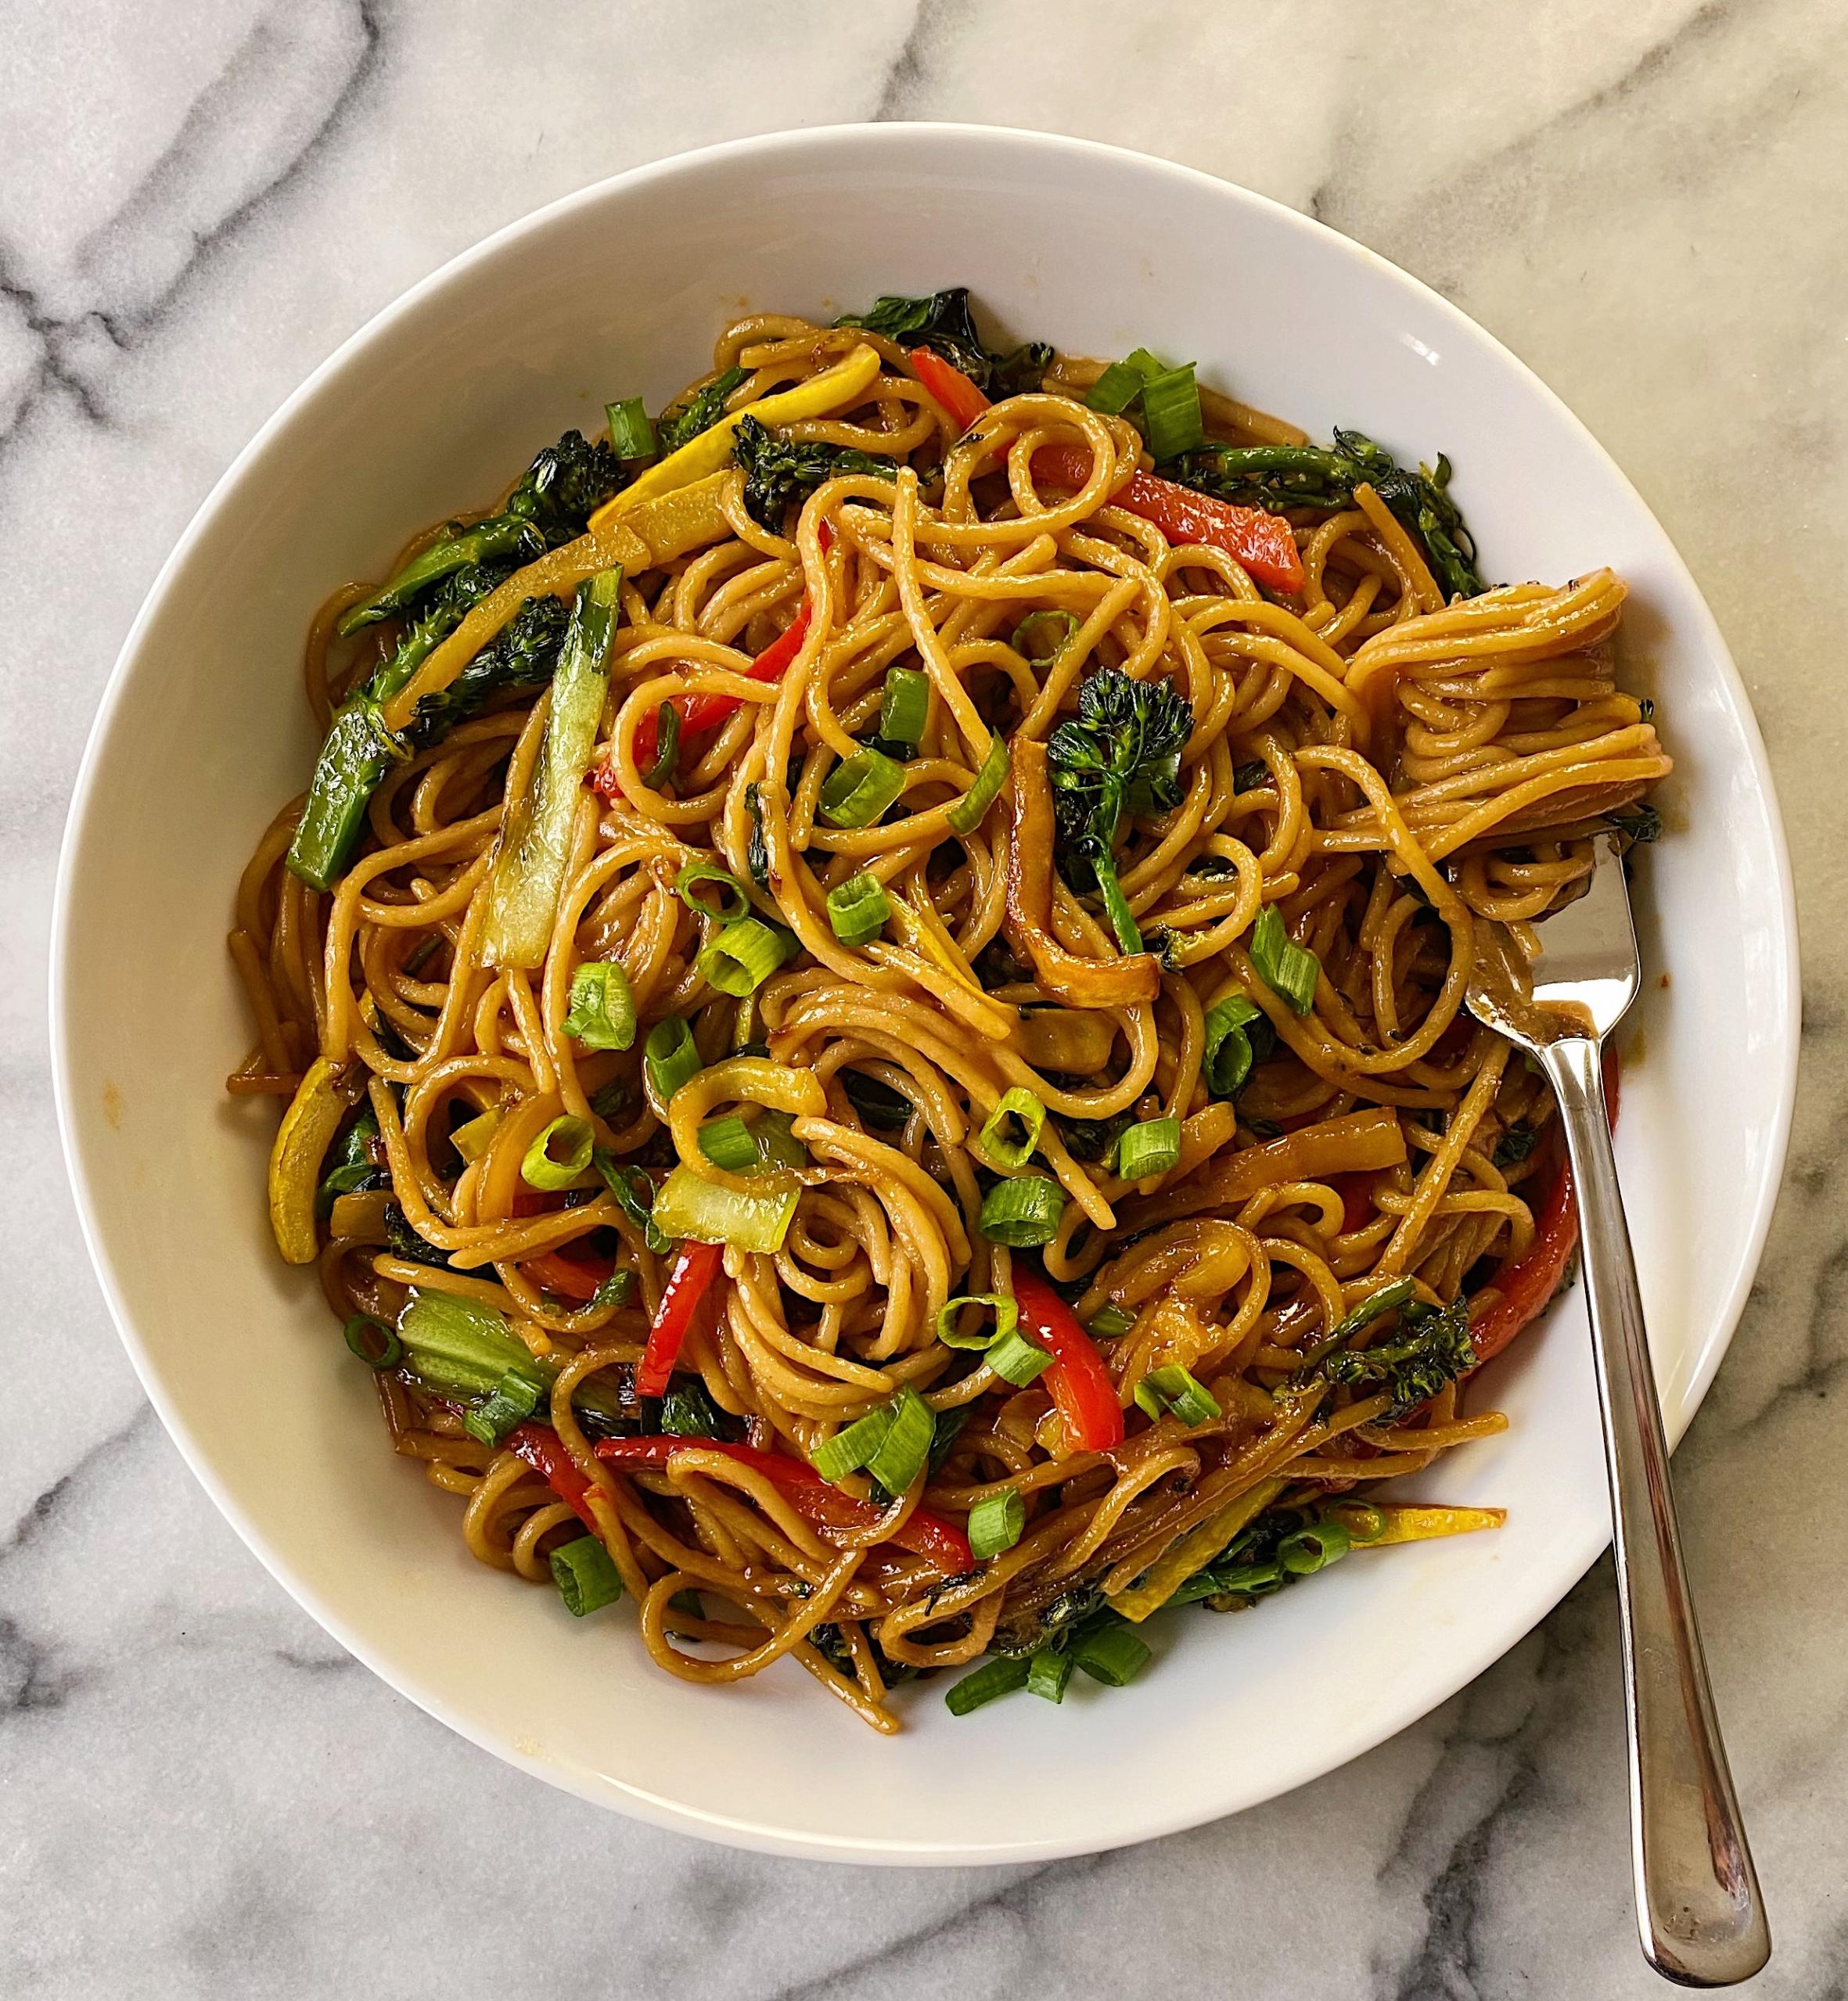  This bowl of chow mein combines crispy vegetables, protein-rich tofu and savory noodles in a harmonious, cruelty-free marriage